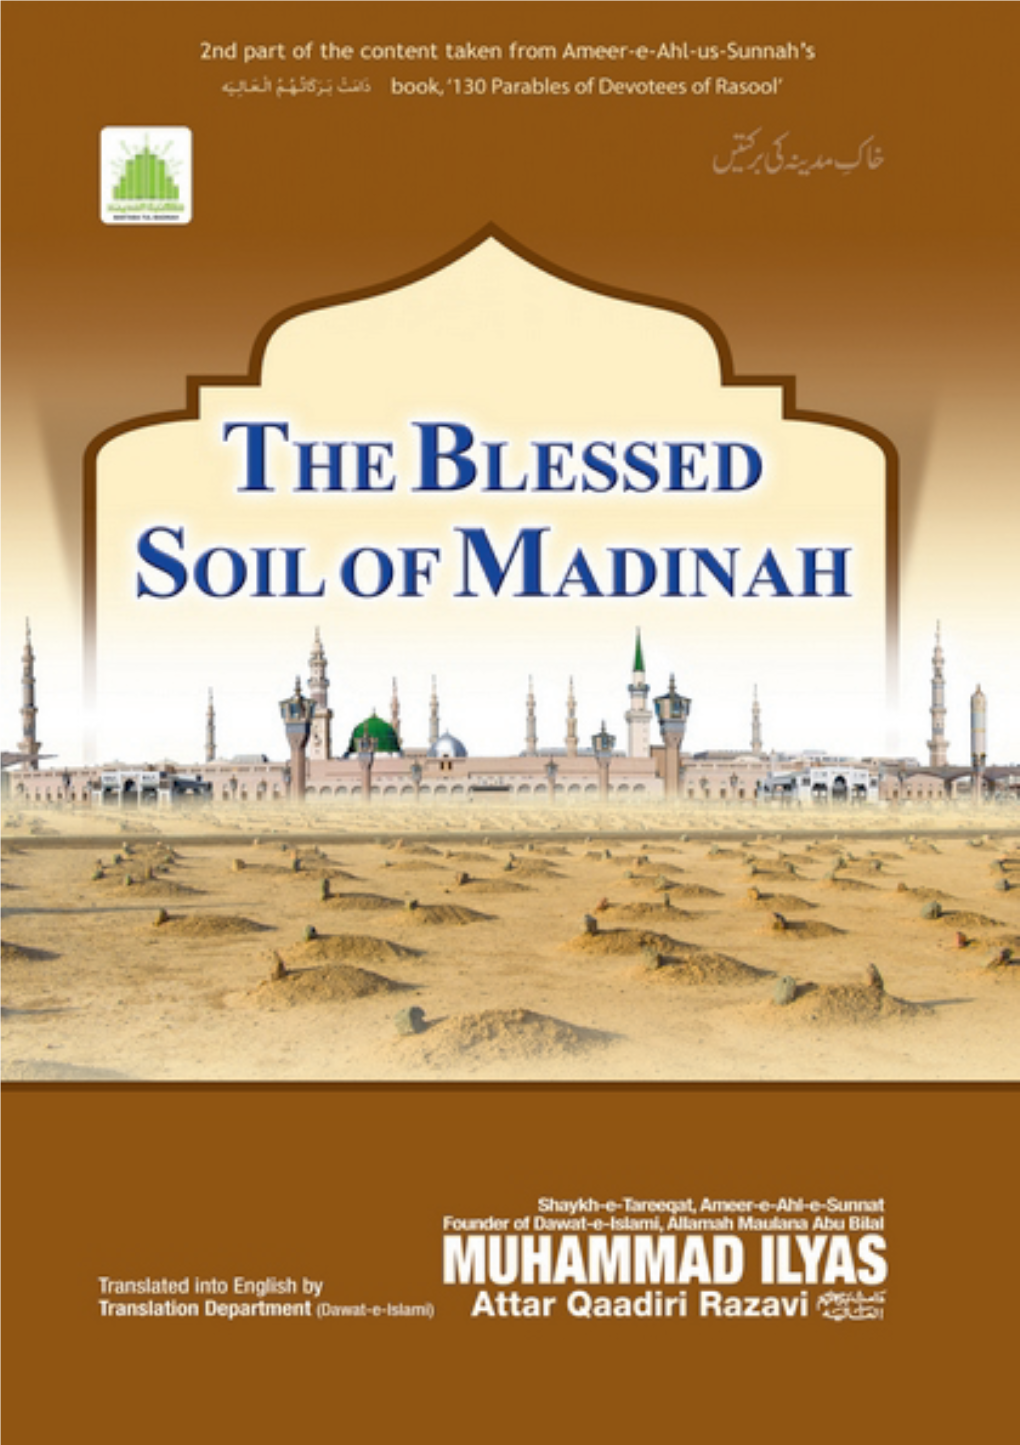 The Blessed Soil of Madinah